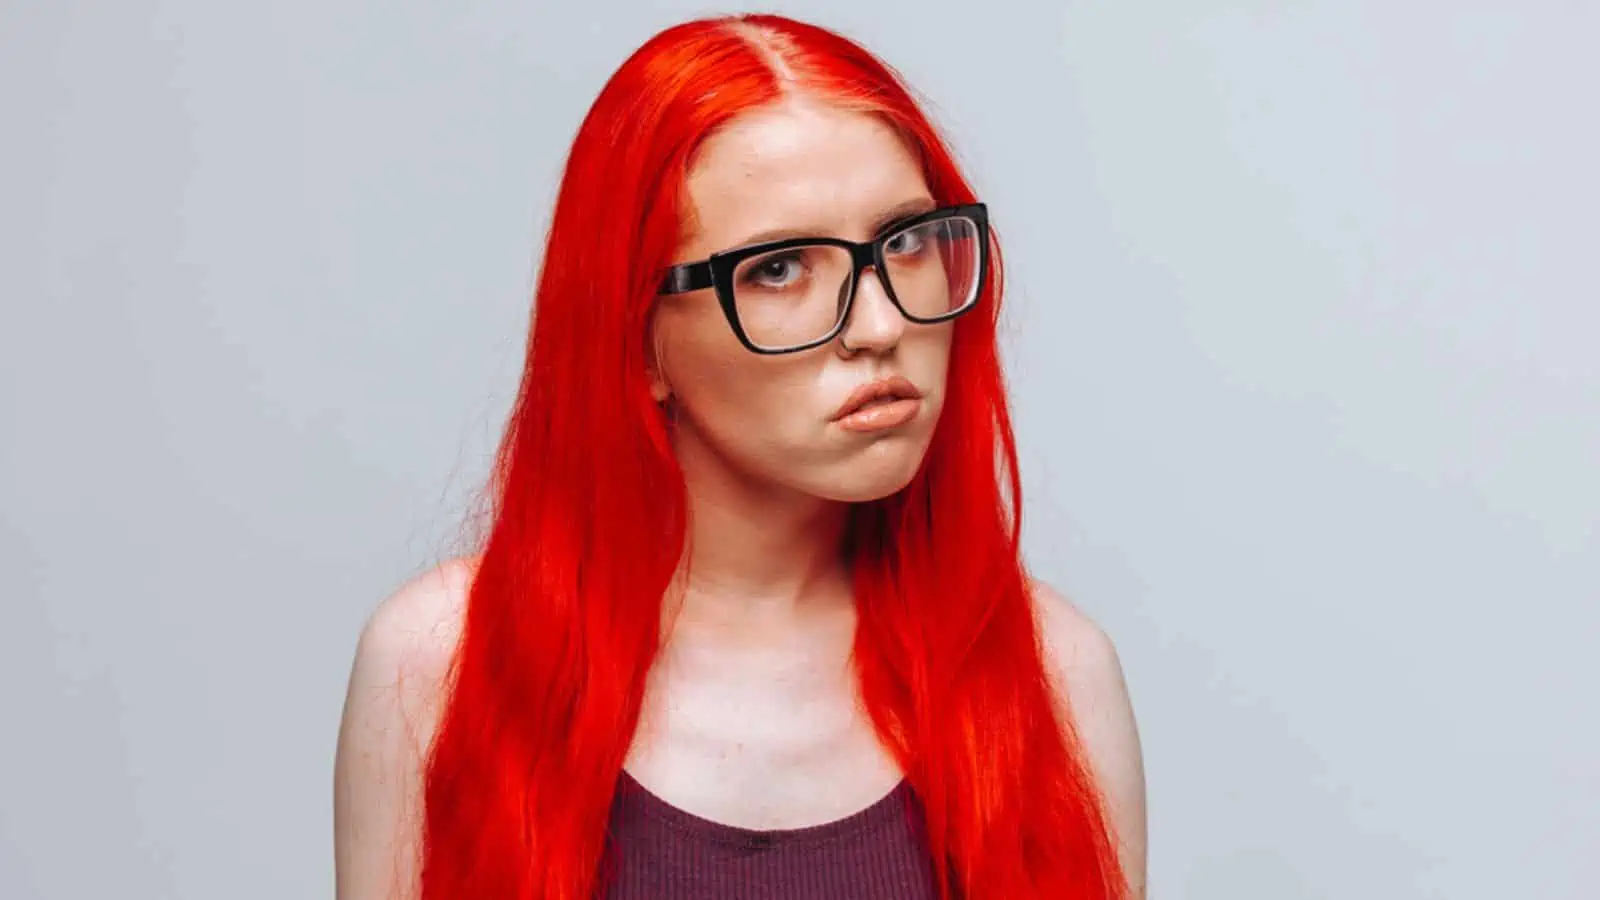 embarrassed teenager red hair glasses confused